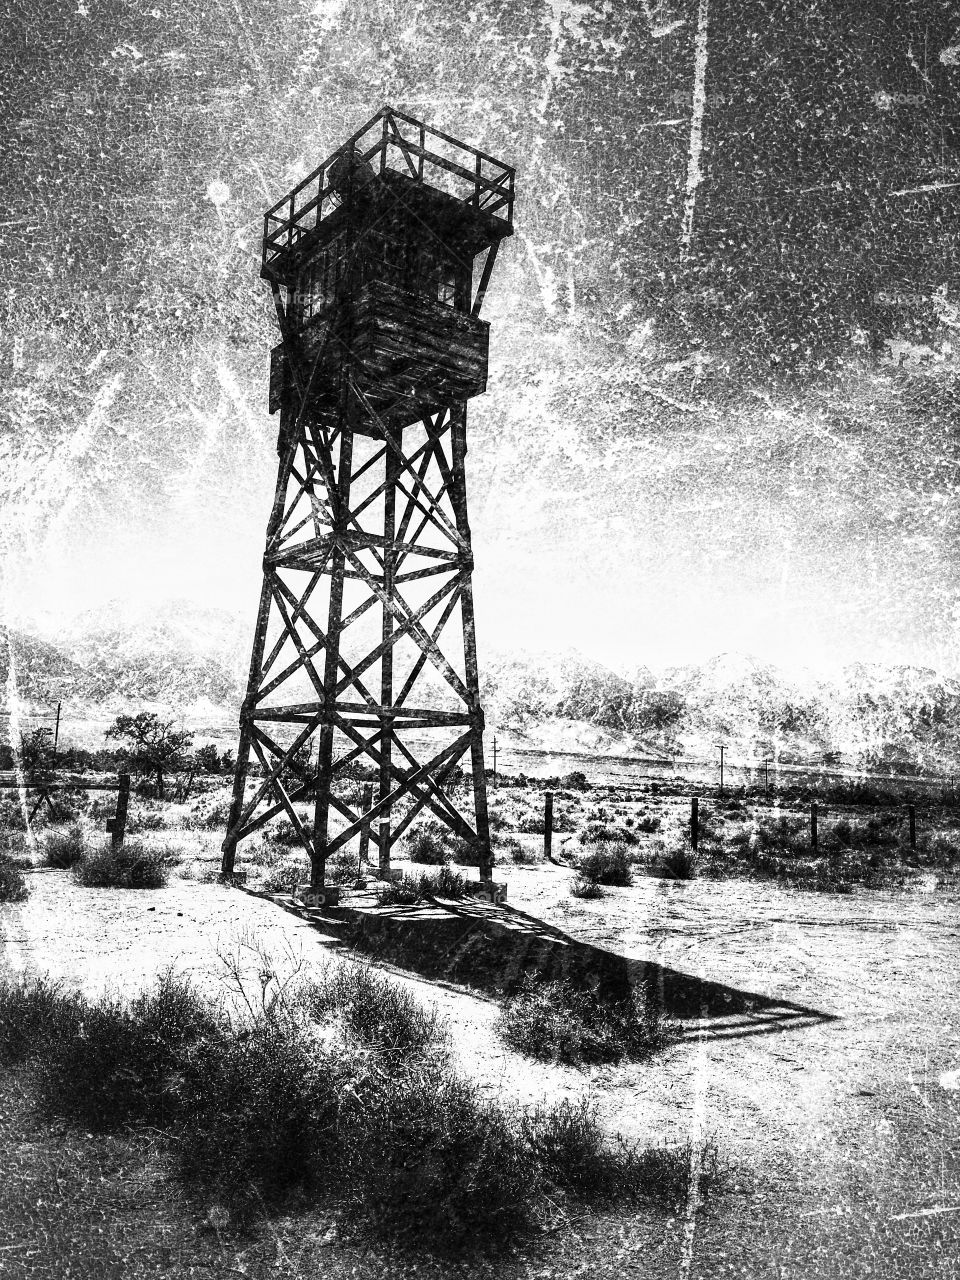 Tall Guard Tower outside a detention center